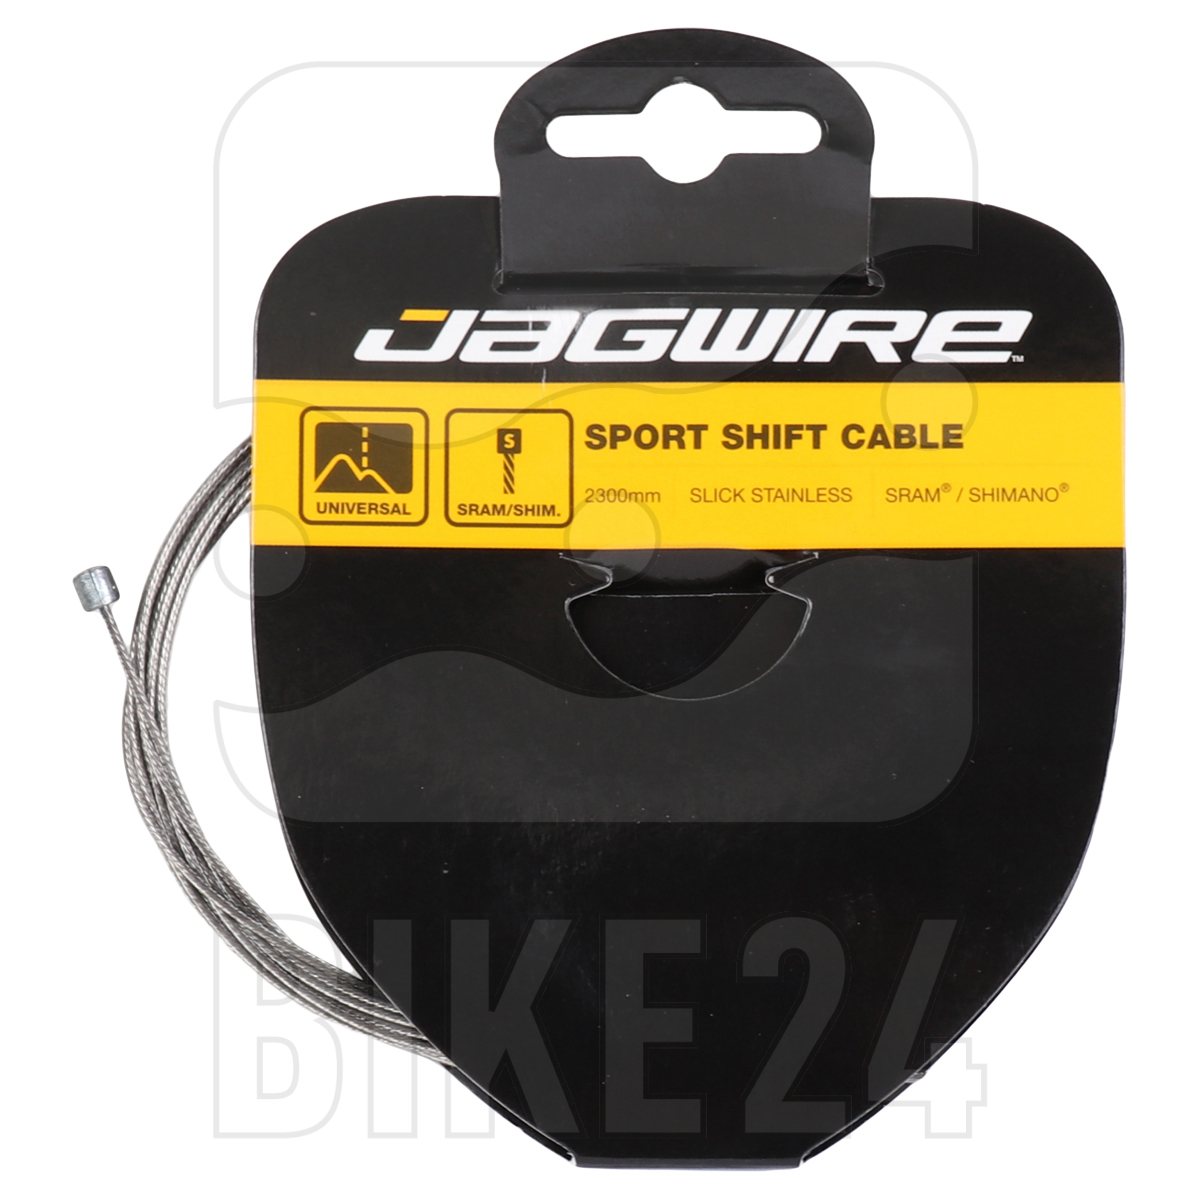 Image of Jagwire Sport Shifting Cable - Stainless Steel, Slick